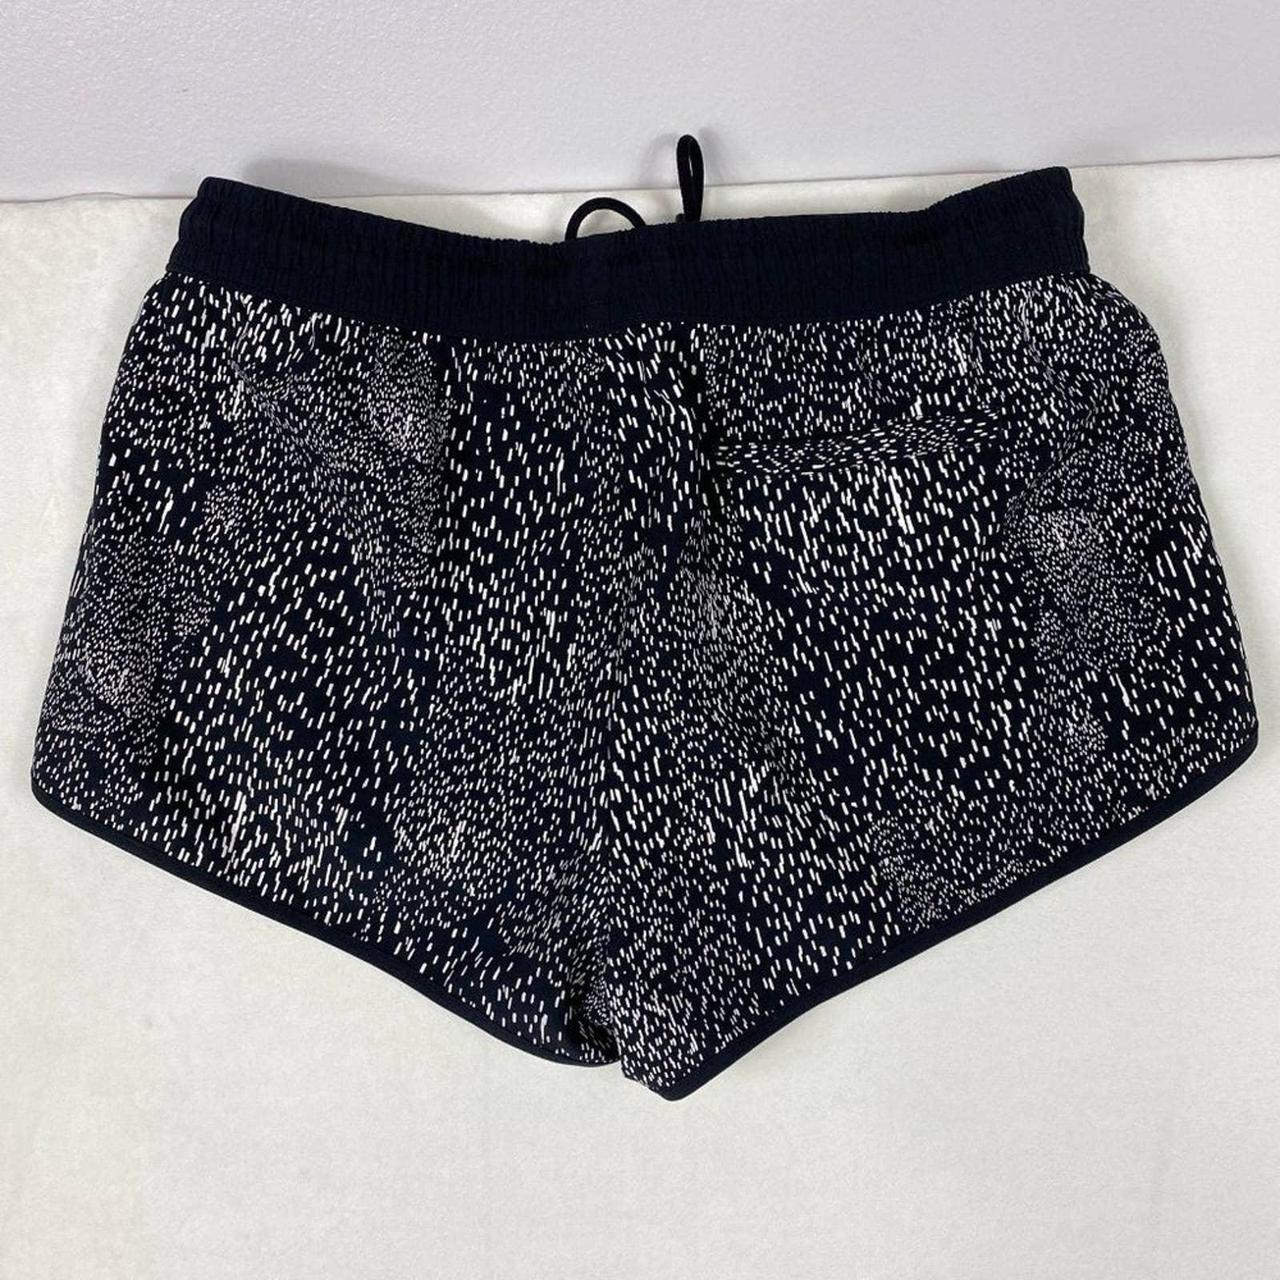 Product Image 2 - Fabletics Black & White Spotted